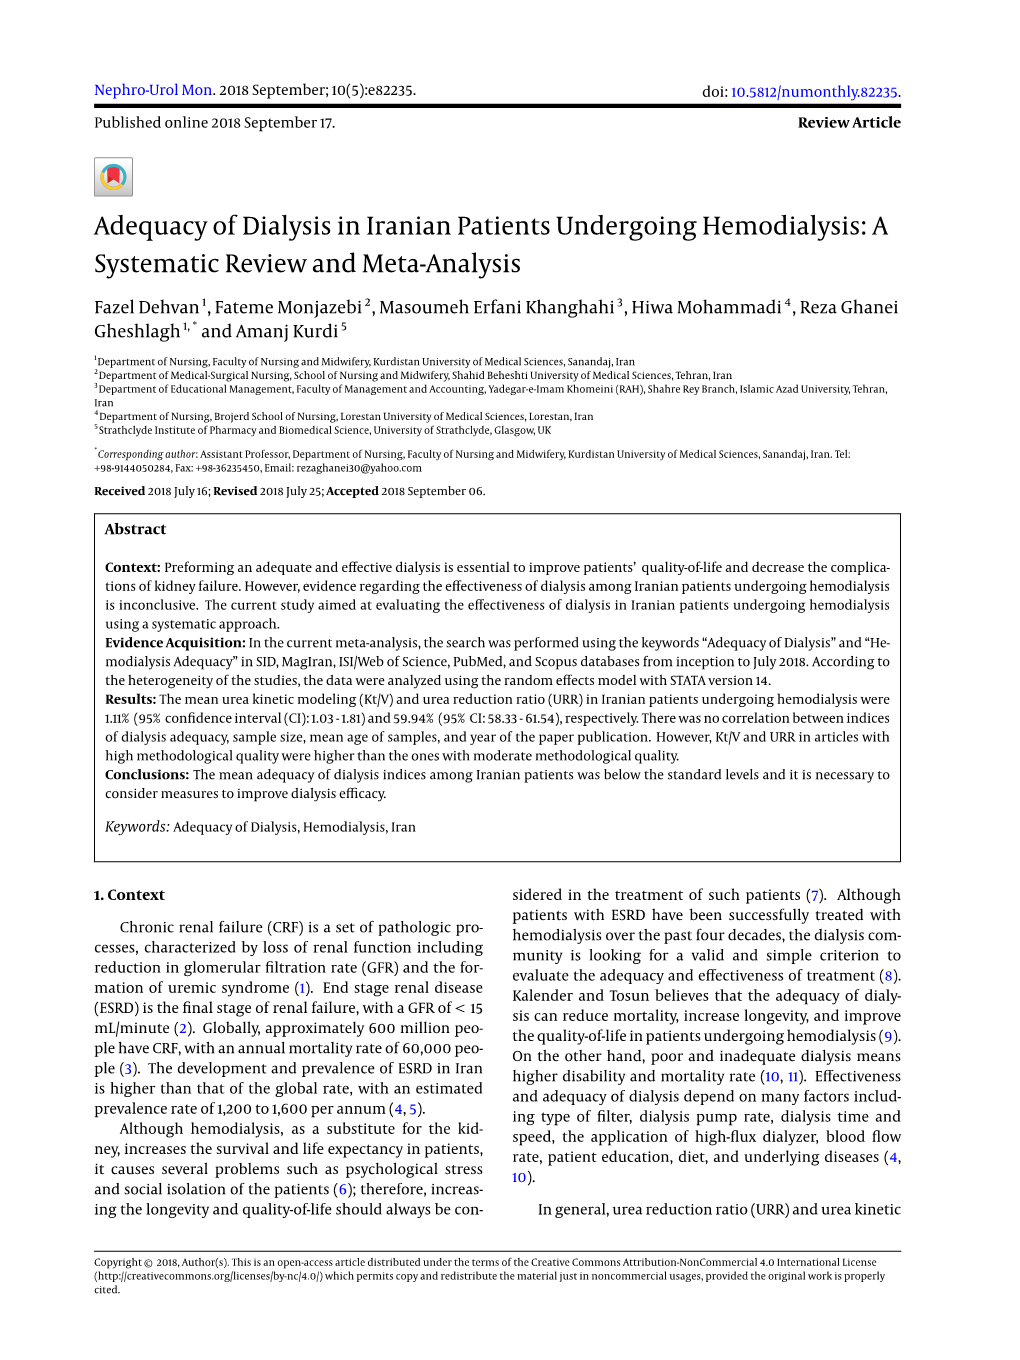 Adequacy of Dialysis in Iranian Patients Undergoing Hemodialysis: a Systematic Review and Meta-Analysis